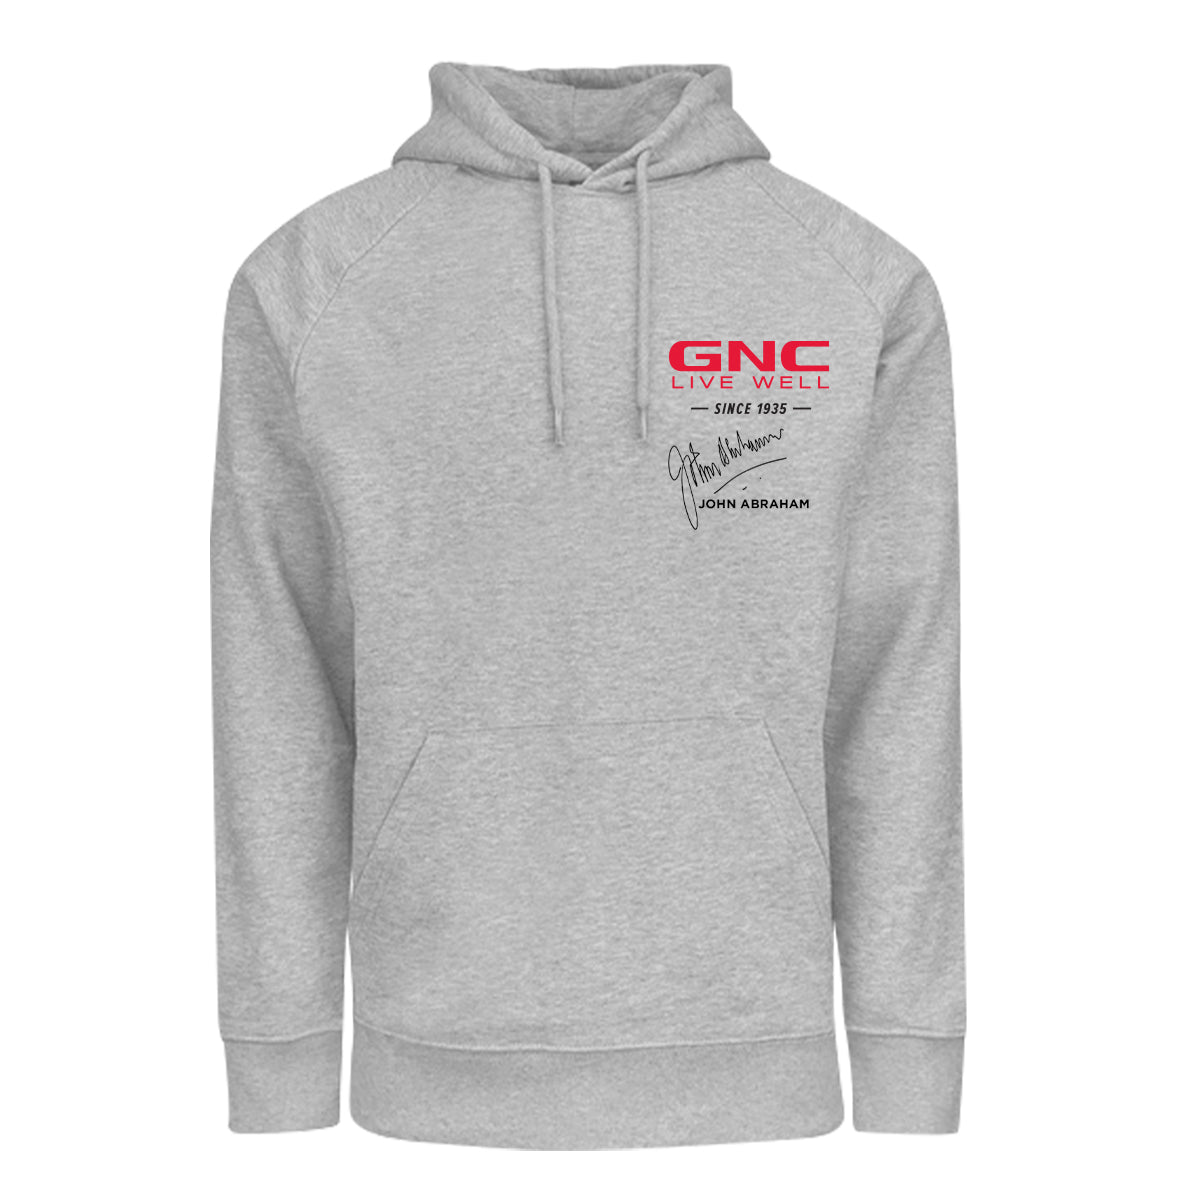 GNC Full Sleeves Grey Hoodie | Sports Wear | 100% Cotton | Signed By John Abraham